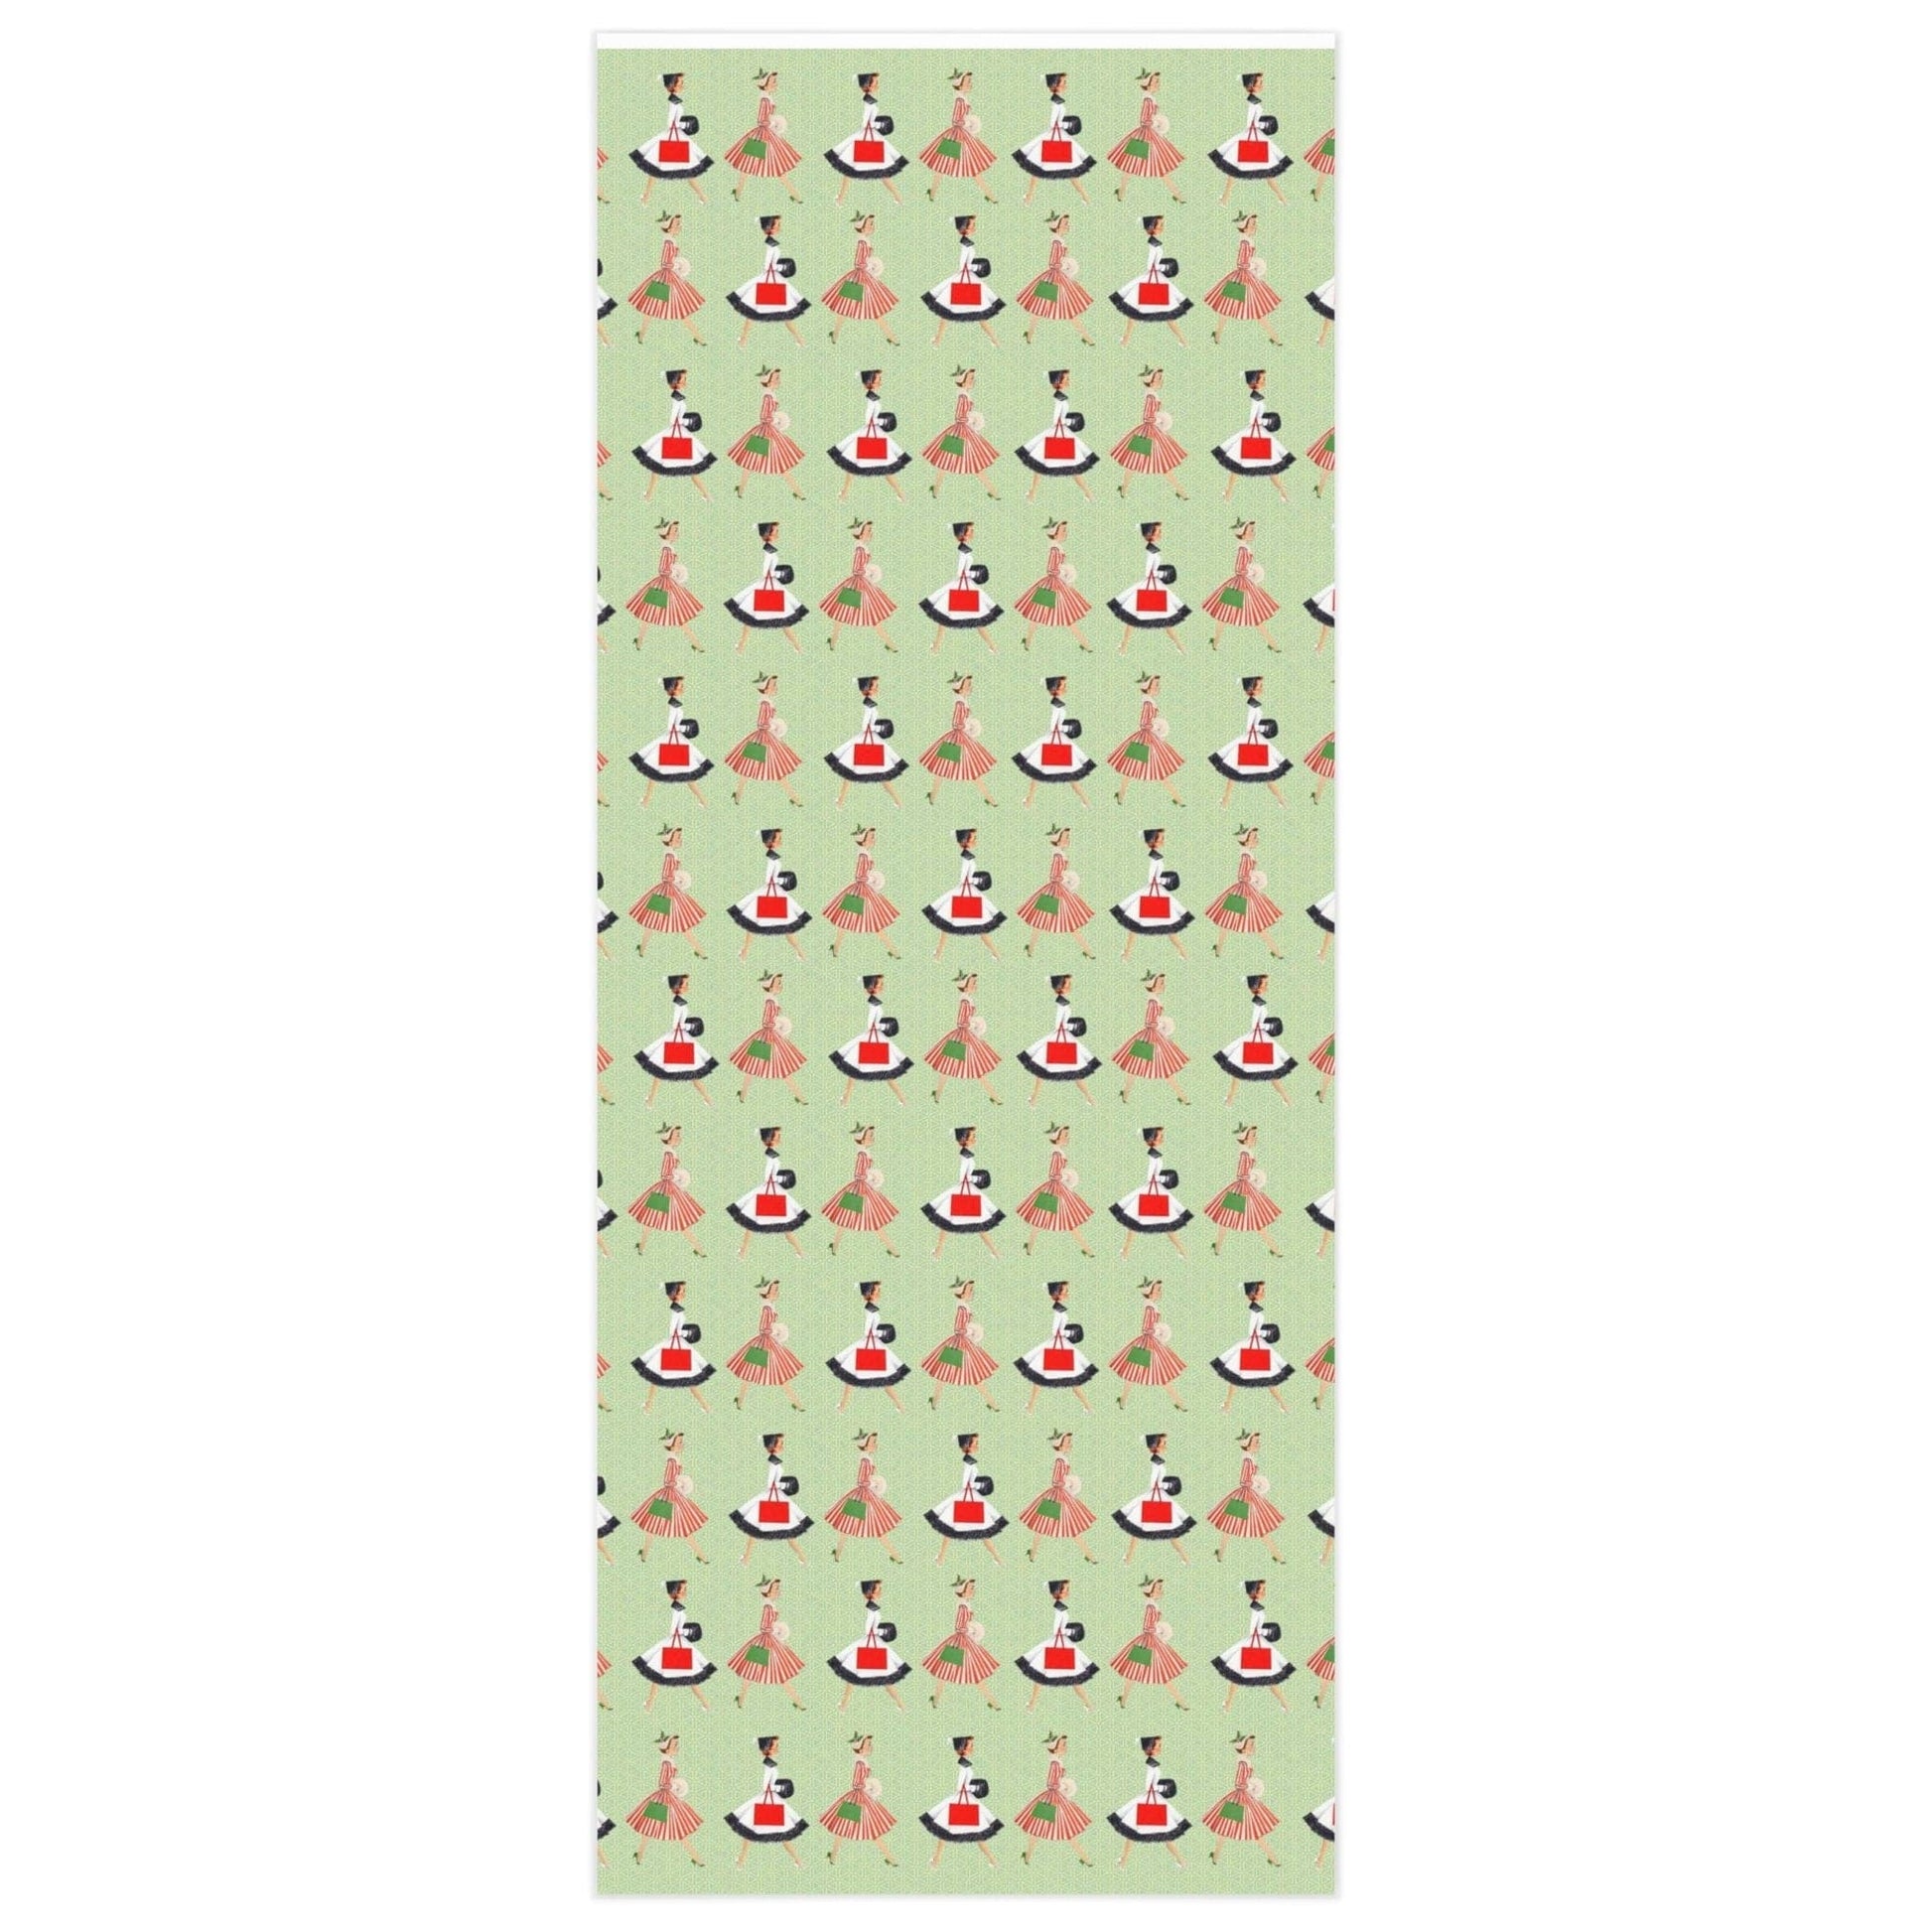 Vintage 1950s Christmas Wrapping Paper, Mid Century Modern Retro Green,  Red, Women, Ladies, Housewives Holiday Gift Wrap